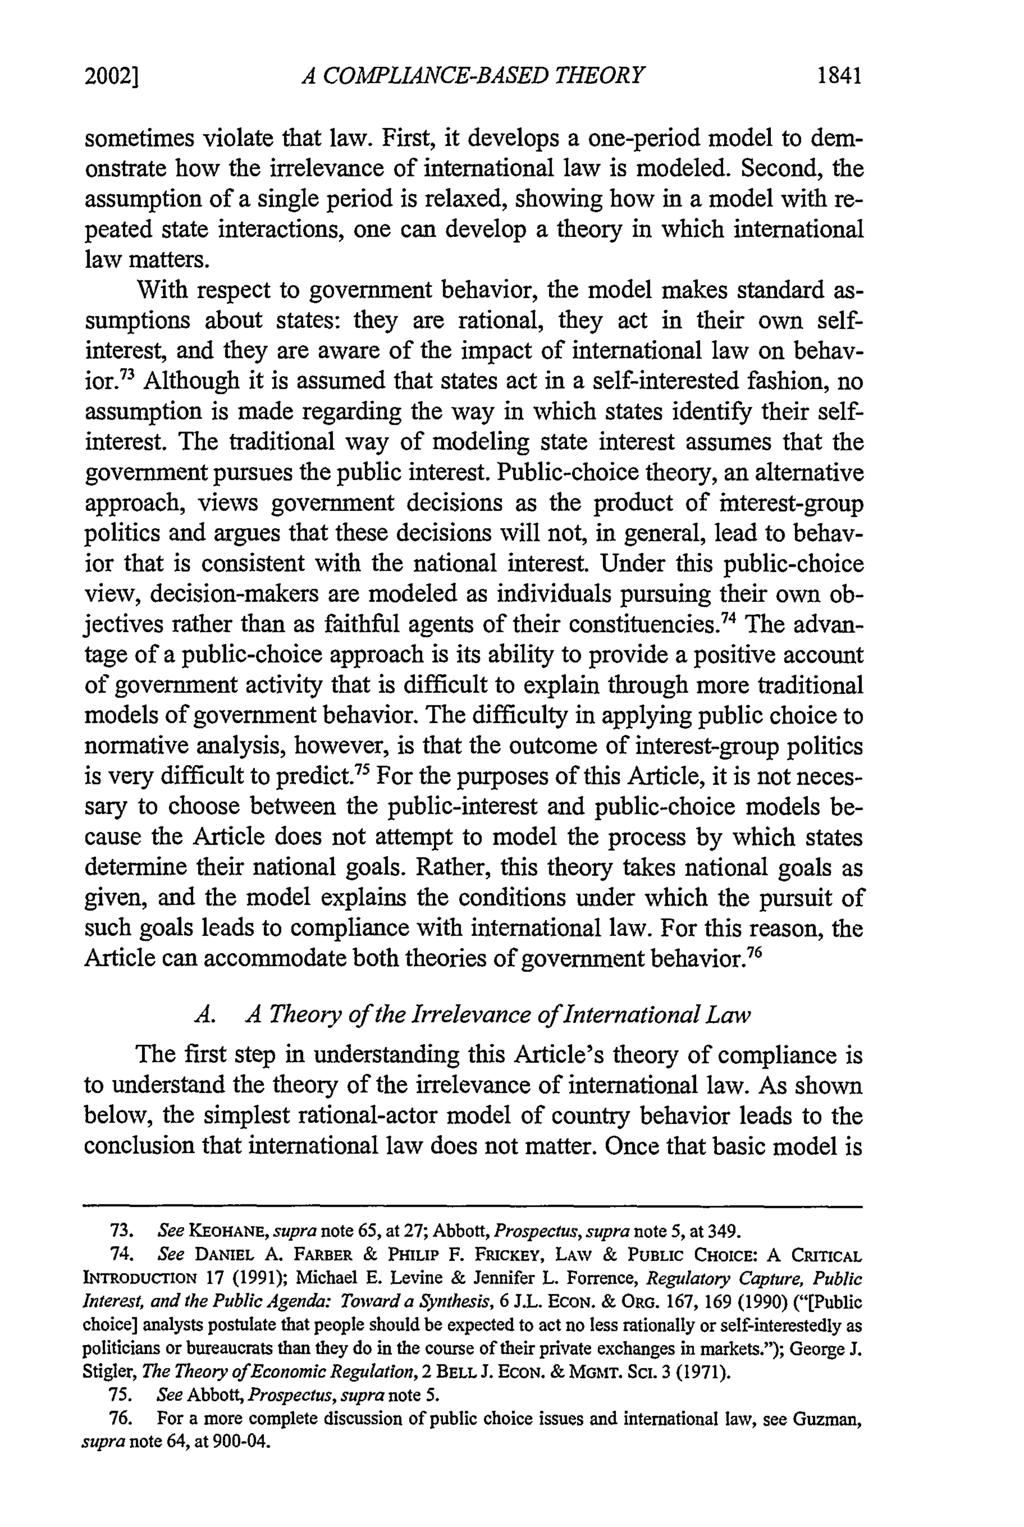 2002] A COMPLIANCE-BASED THEORY 1841 sometimes violate that law. First, it develops a one-period model to demonstrate how the irrelevance of international law is modeled.